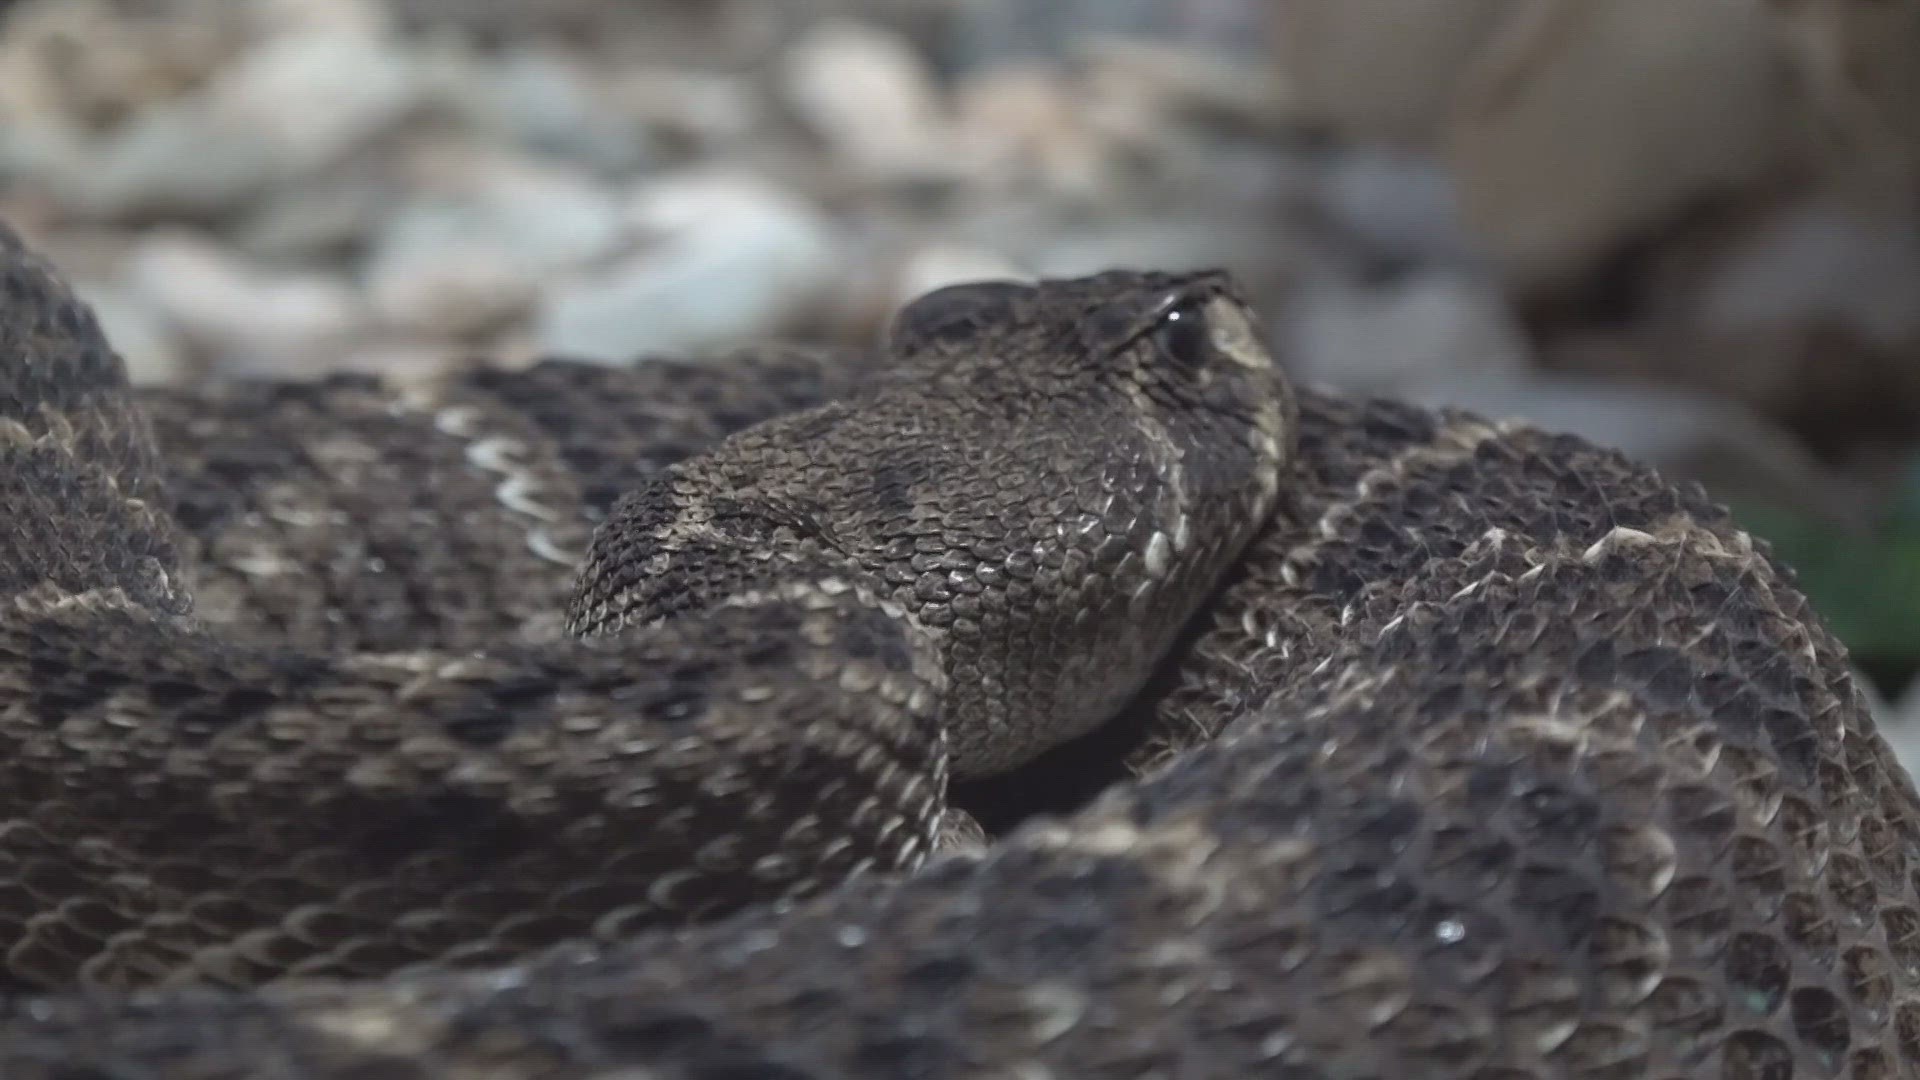 Hear some tips on how to avoid rattlesnakes in Central Texas.